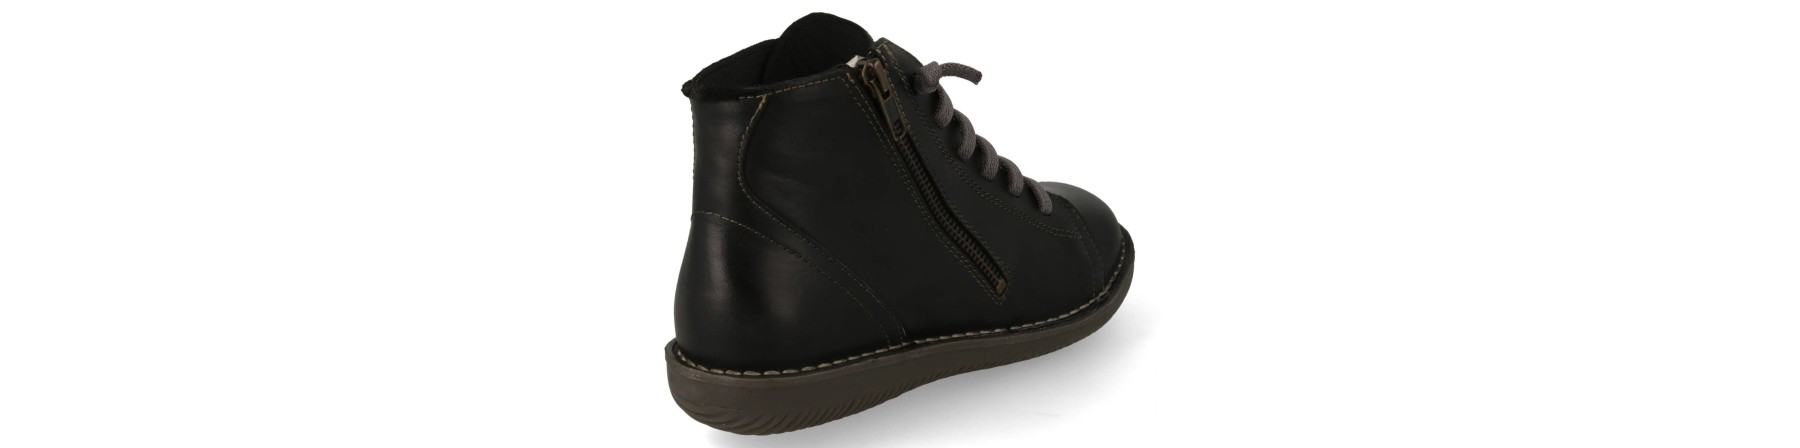 BOTINES CONFORT MUJER PIEL MOD. MOUNTAIN